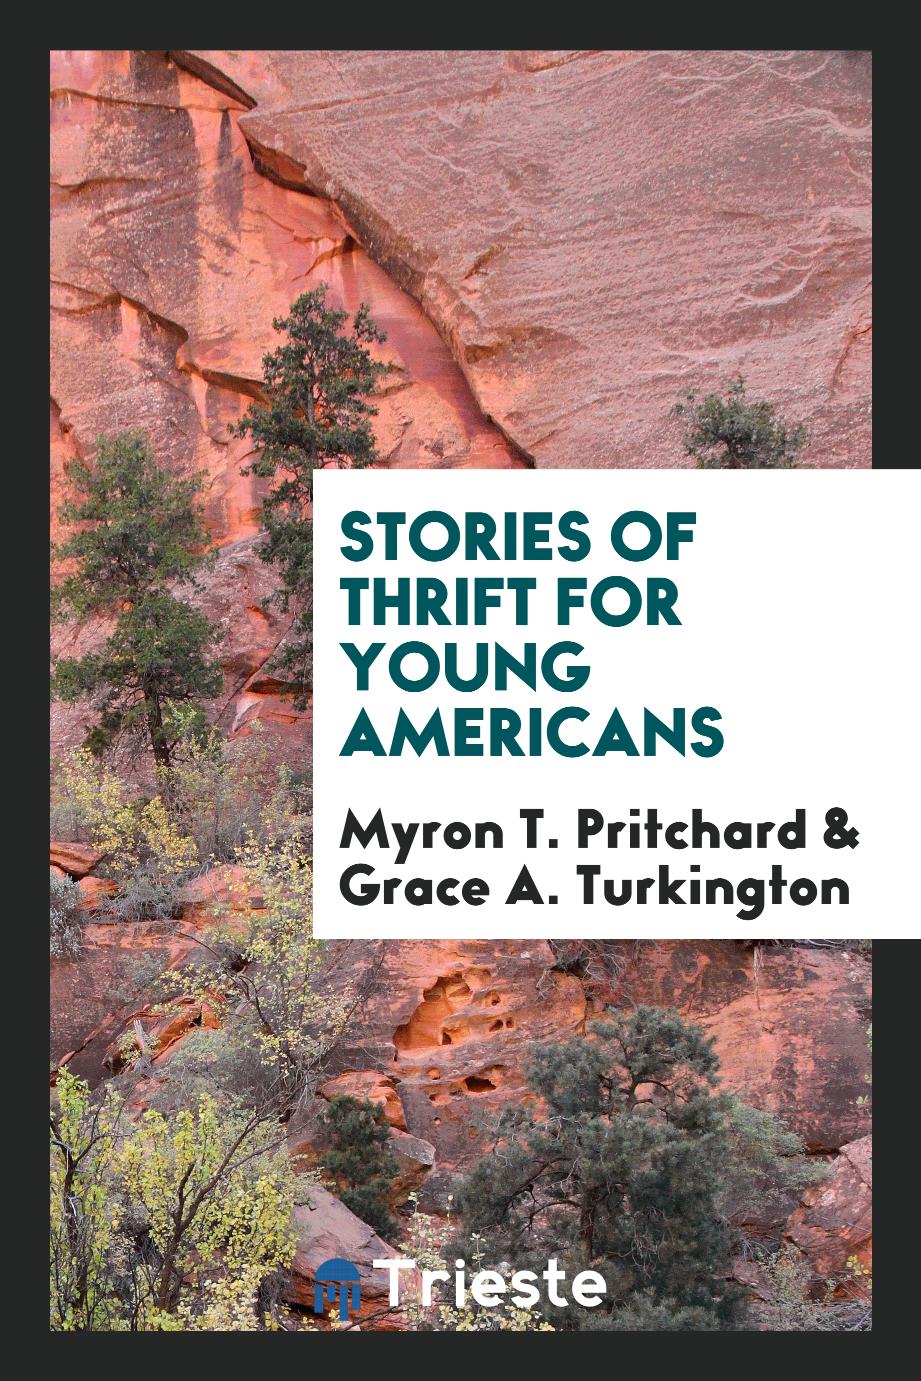 Stories of thrift for young Americans